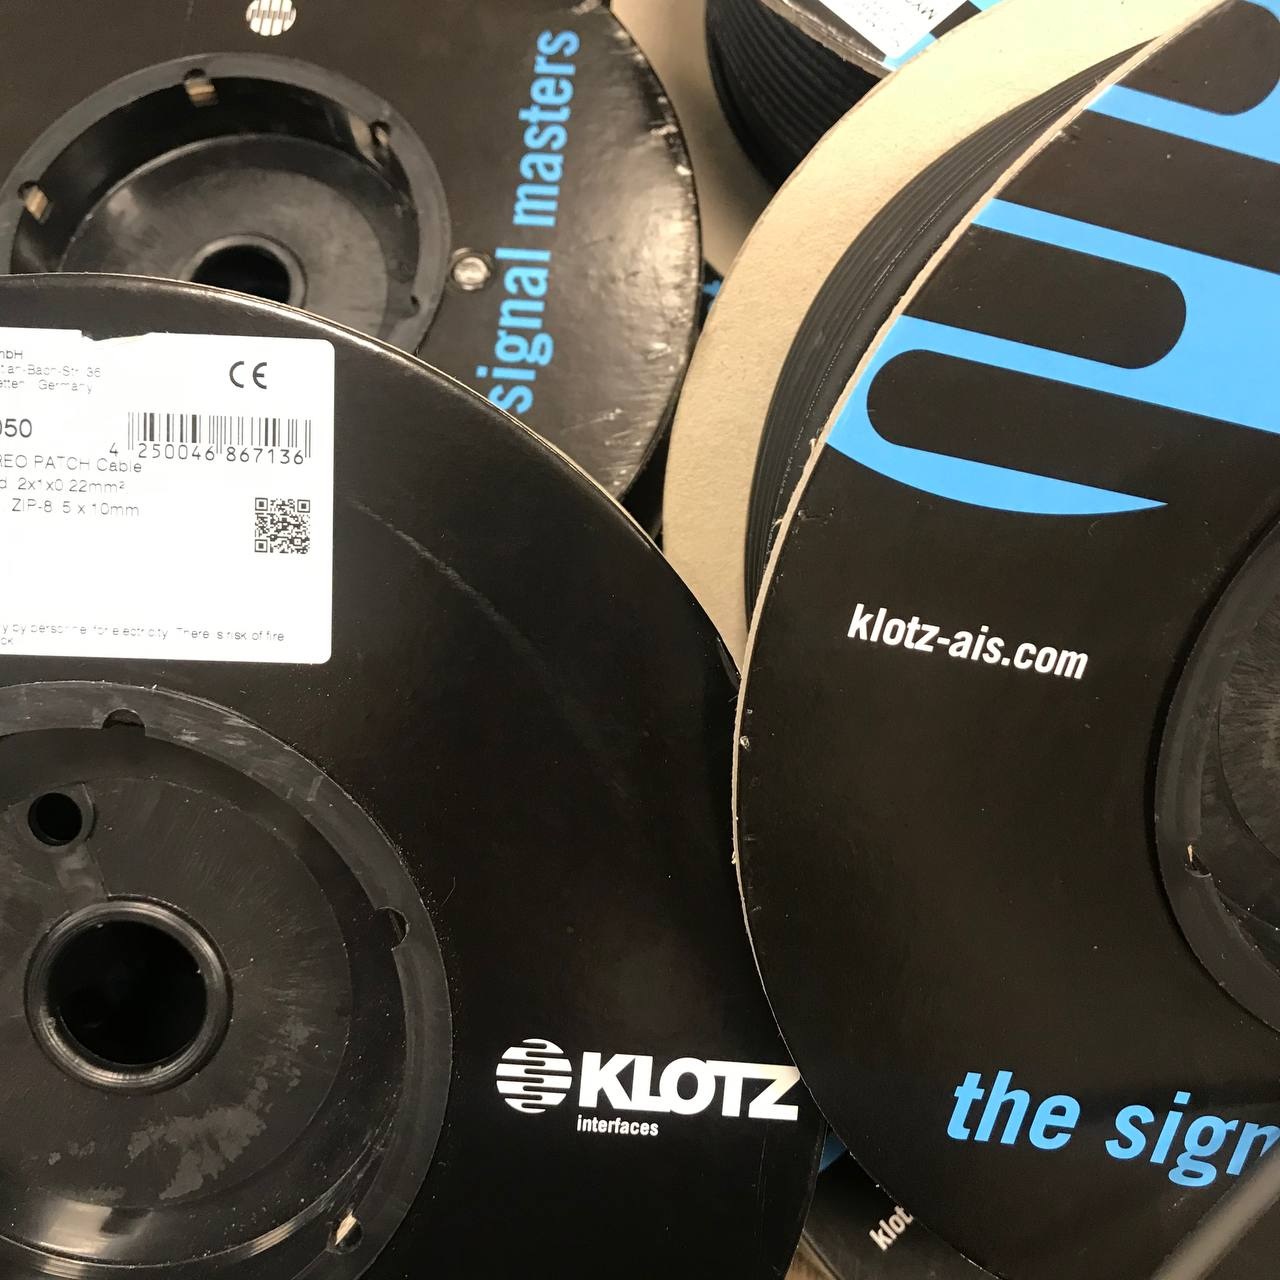 Coiled cables from the German brand Klotz with discounts